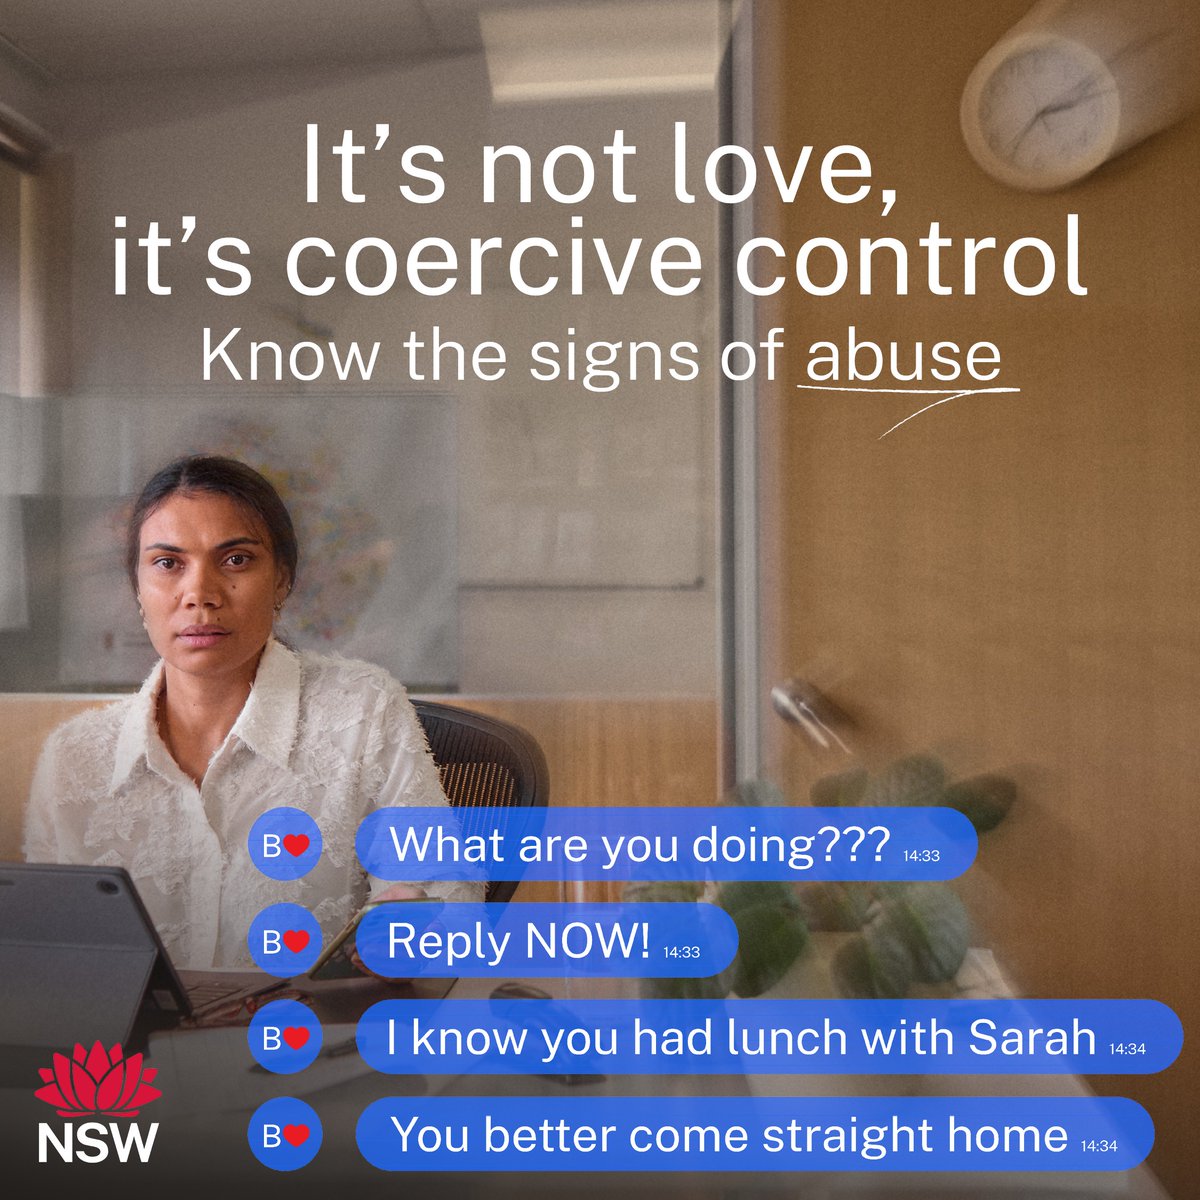 Coercive control is when someone repeatedly hurts, scares, or isolates another person to control them. It’s domestic abuse and it causes serious harm. From 1 July there are new laws in NSW about coercive control. Learn more at ow.ly/7HV150Rz9S4 #CoerciveControl #ItsNotLove